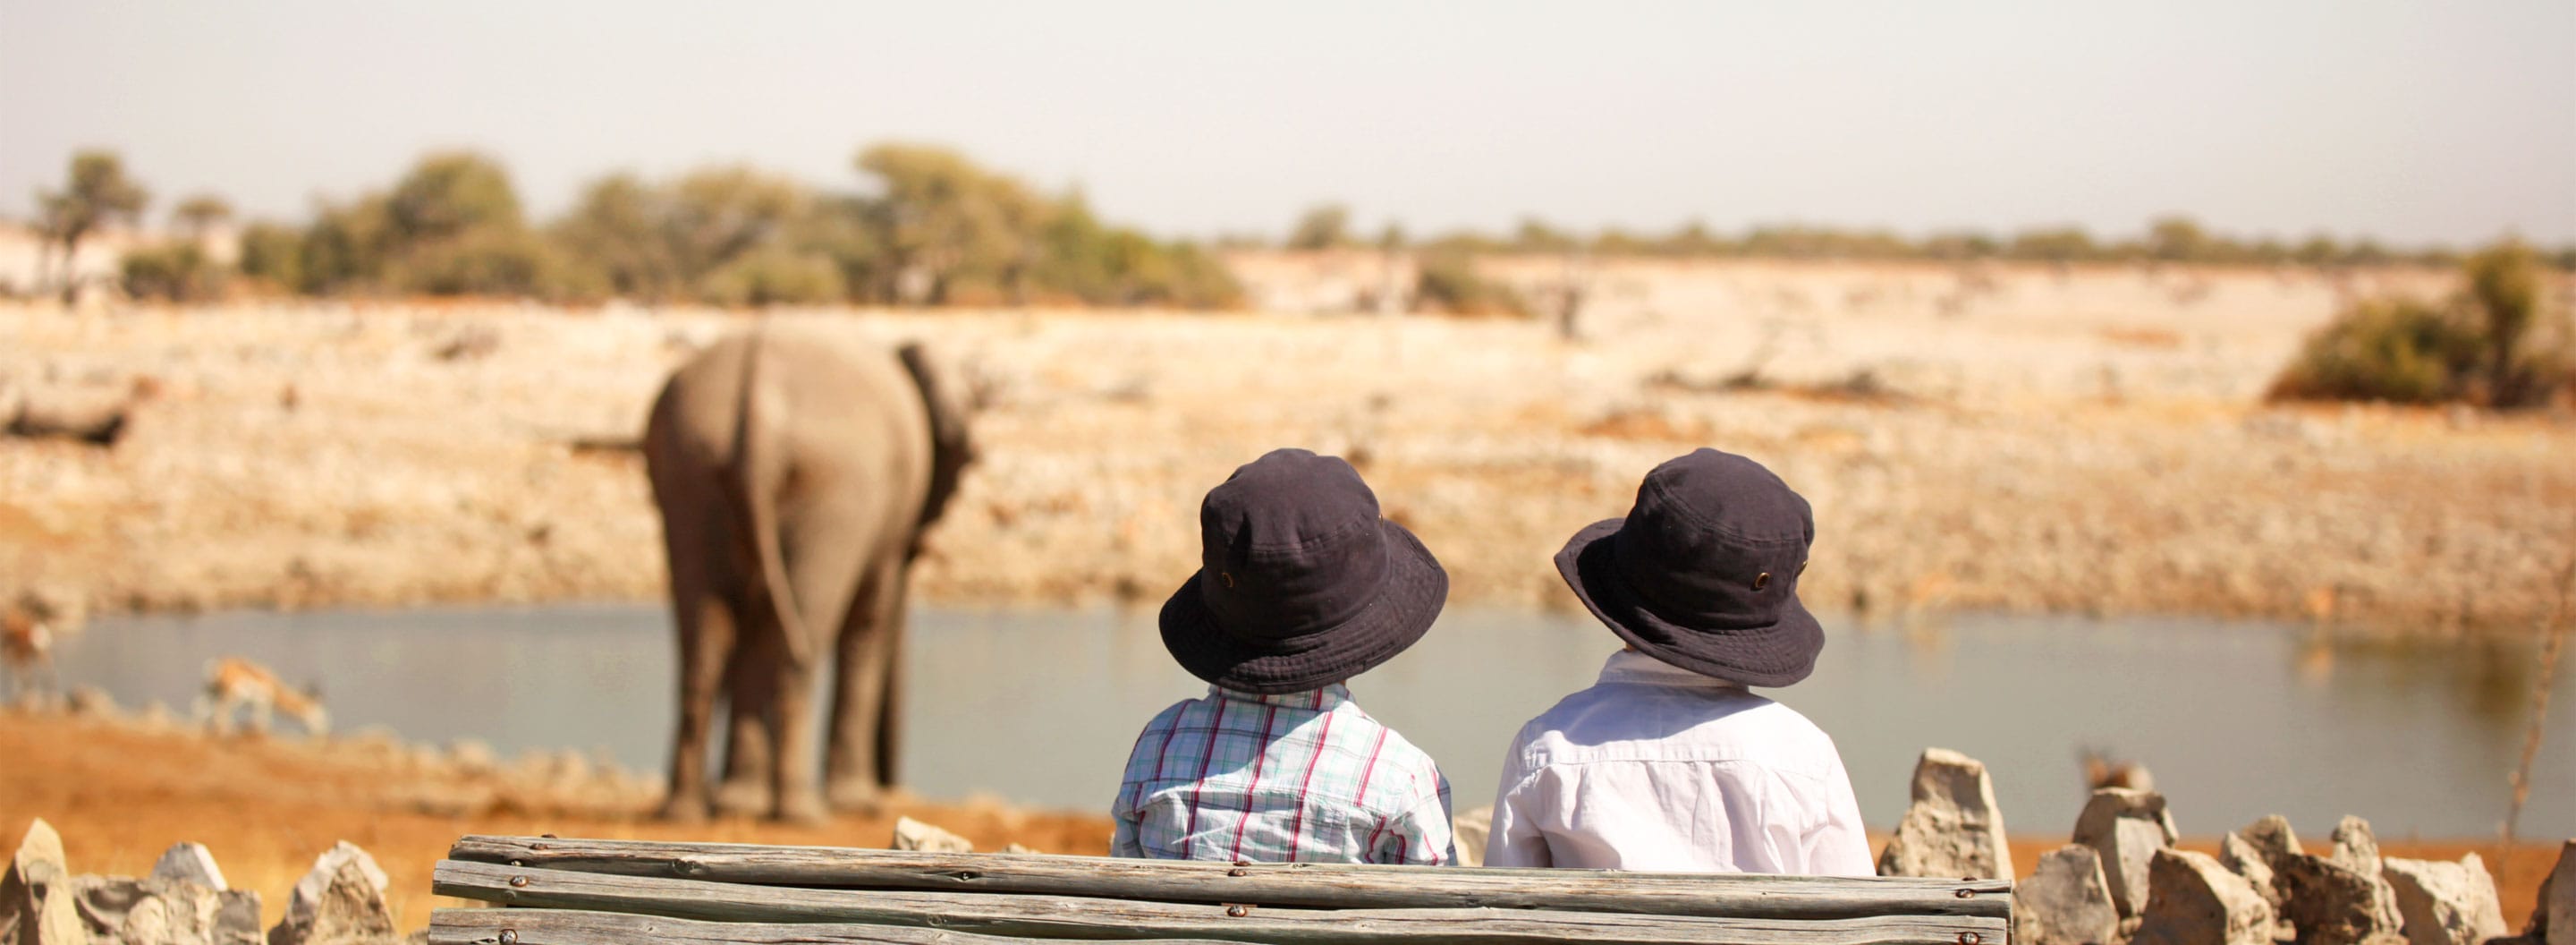 Two young kids watching an elephant at a watering hole